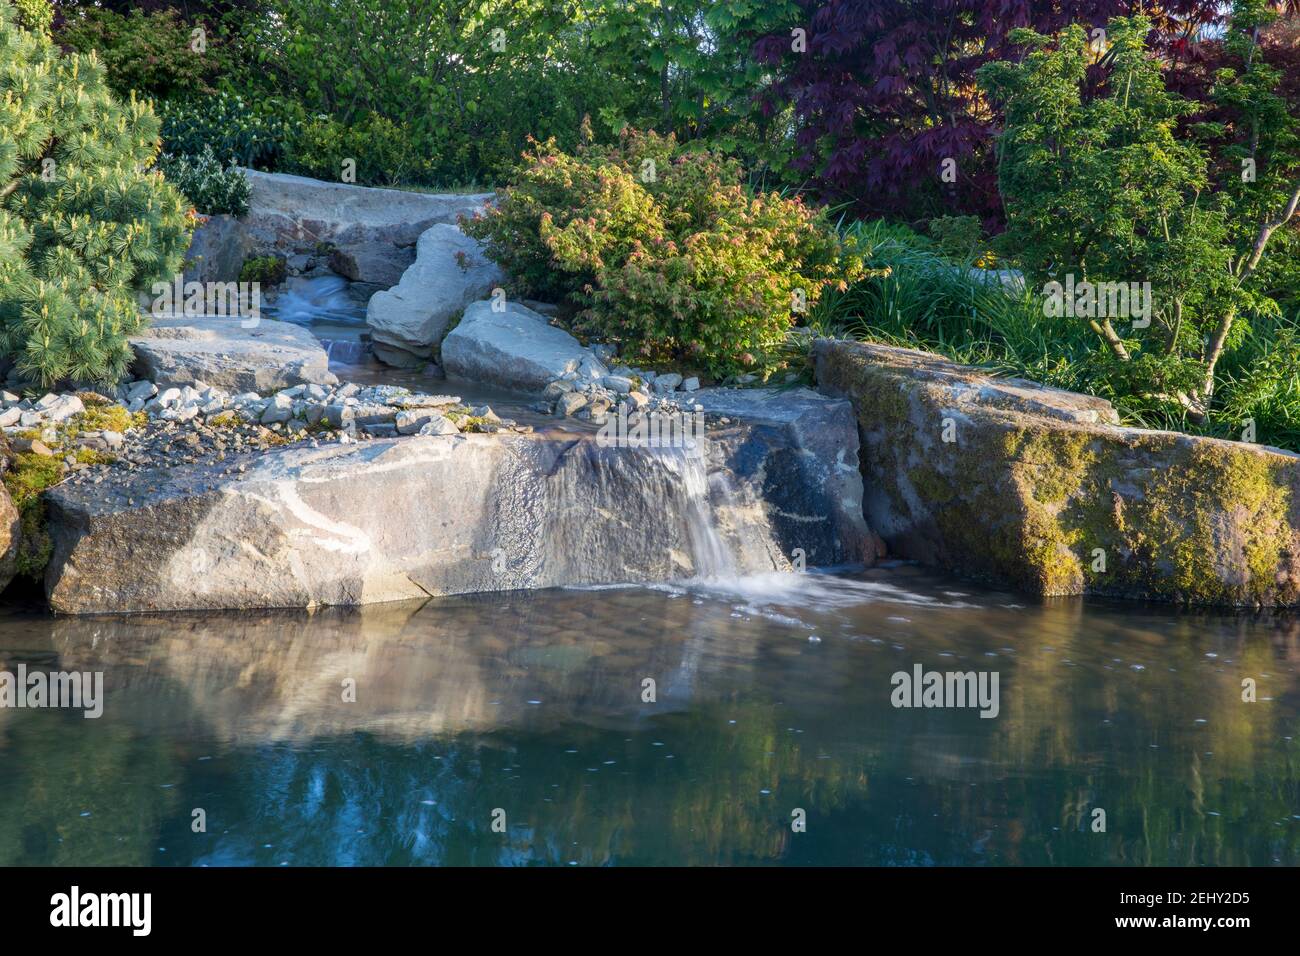 A waterfall cascading over large stone boulders in to a water feature garden pond lake with Pinus sylvestris and Acer palmatum trees England UK Stock Photo